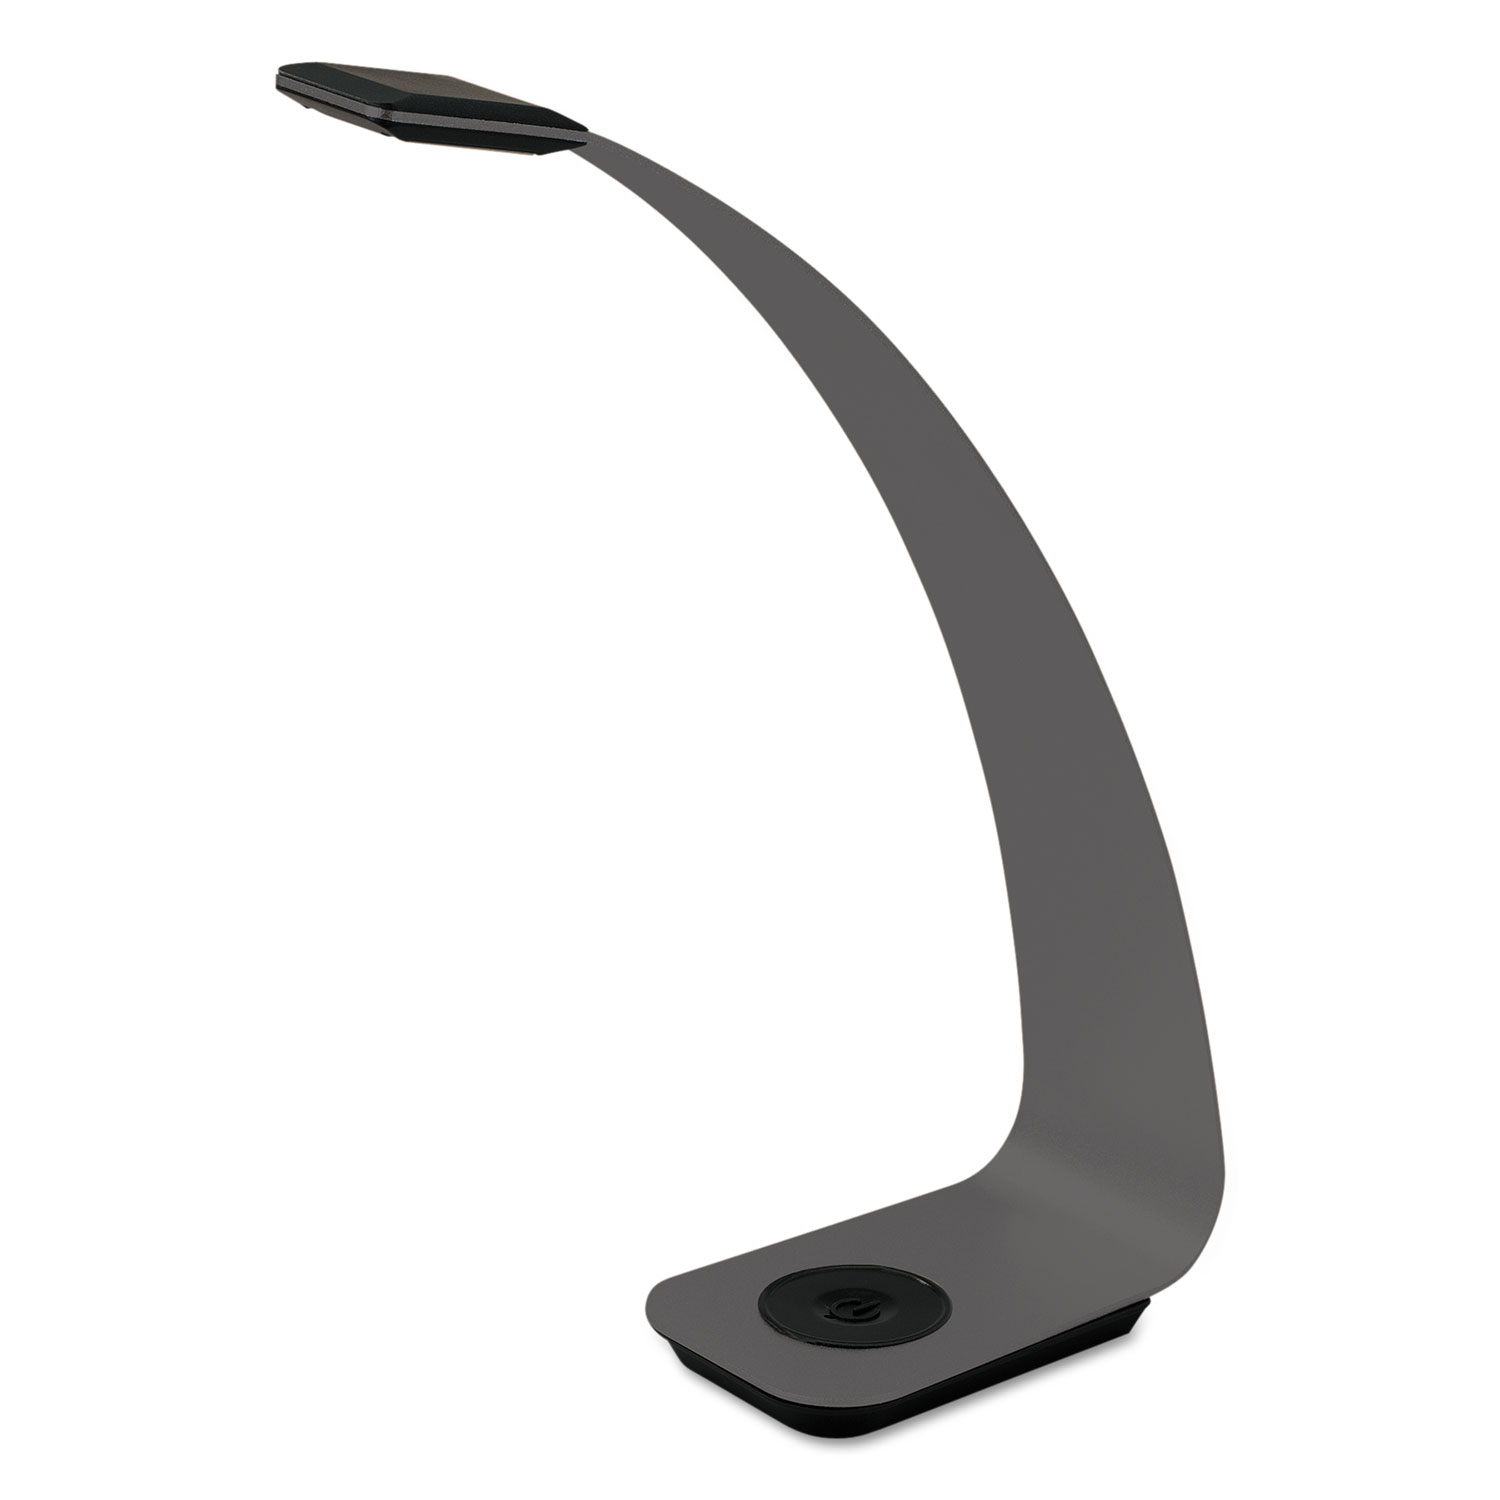 Curve LED Lamp, Smart-Touch, 11 1/2 High, Graphite Gray